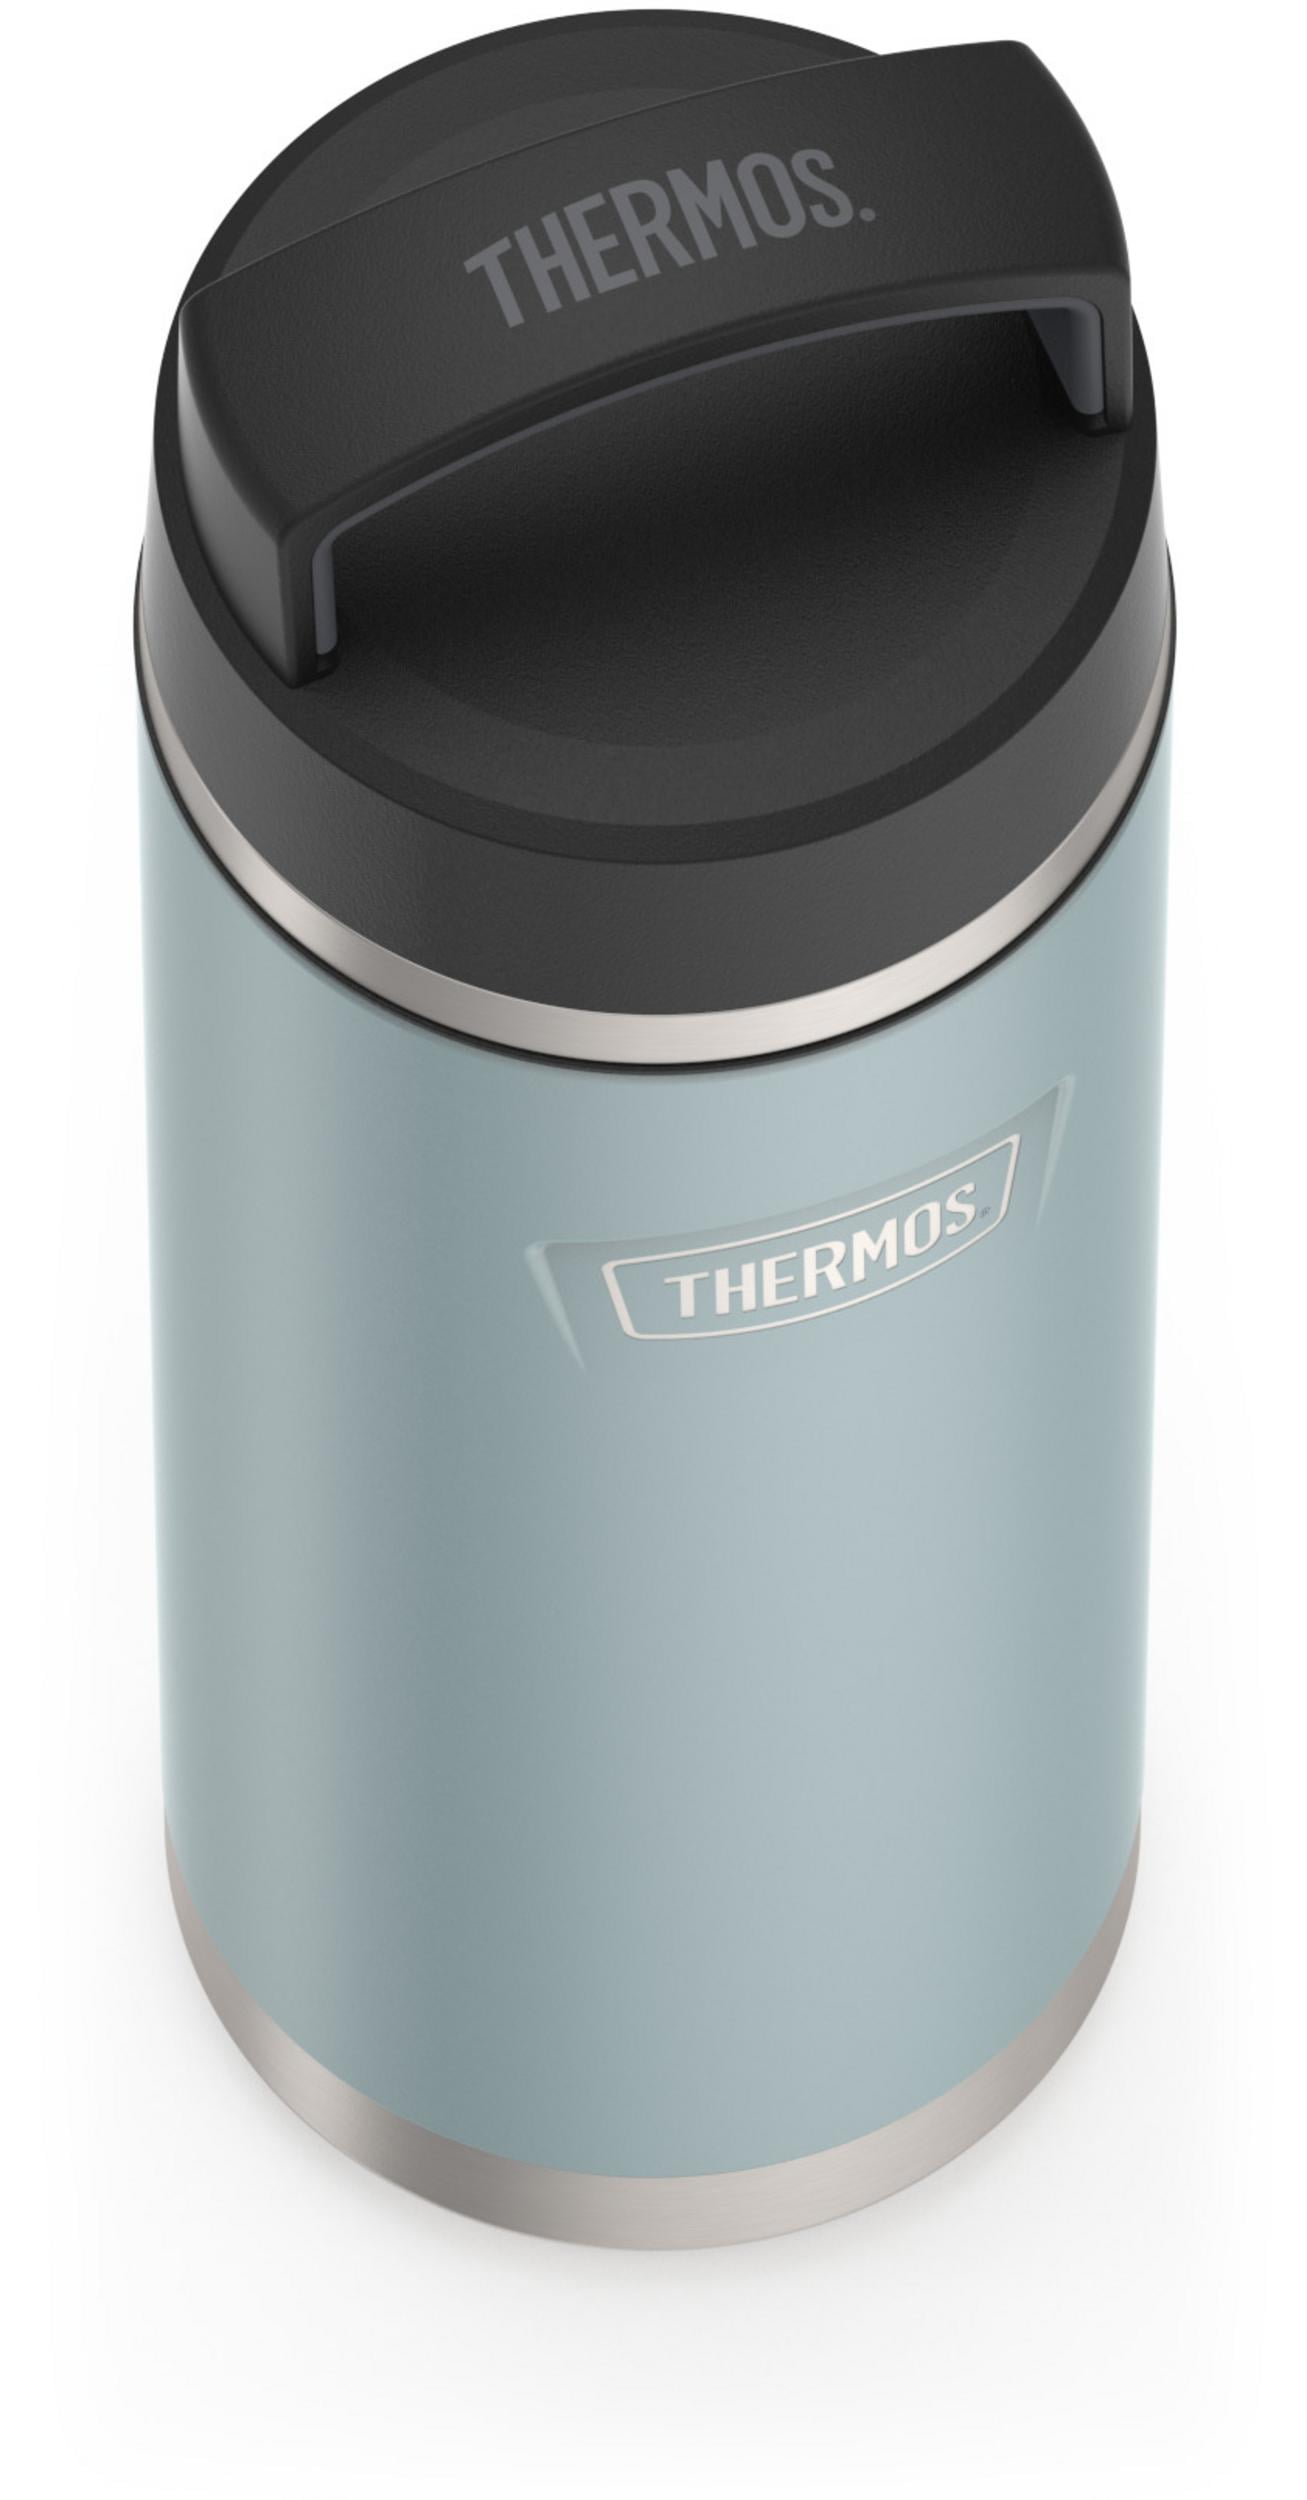 AAA.com l Thermos l 32oz Icon Stainless Steel Water Bottle w/ Screw Top